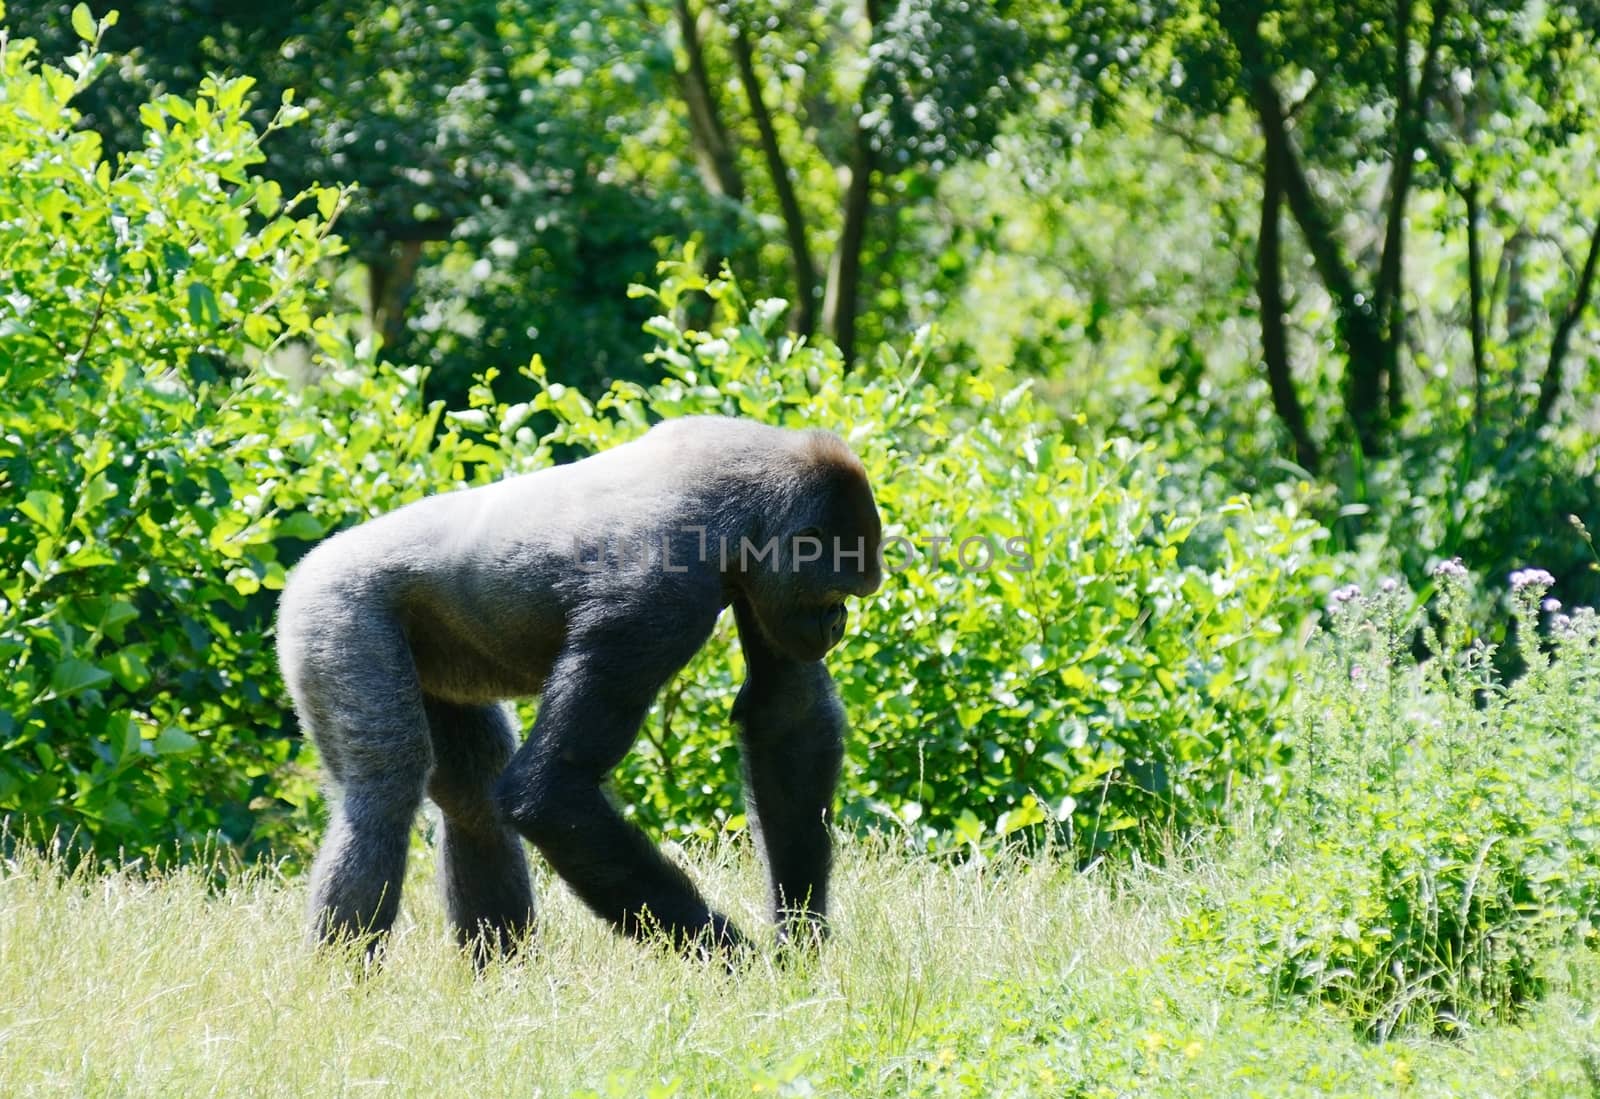 Gorilla by kmwphotography